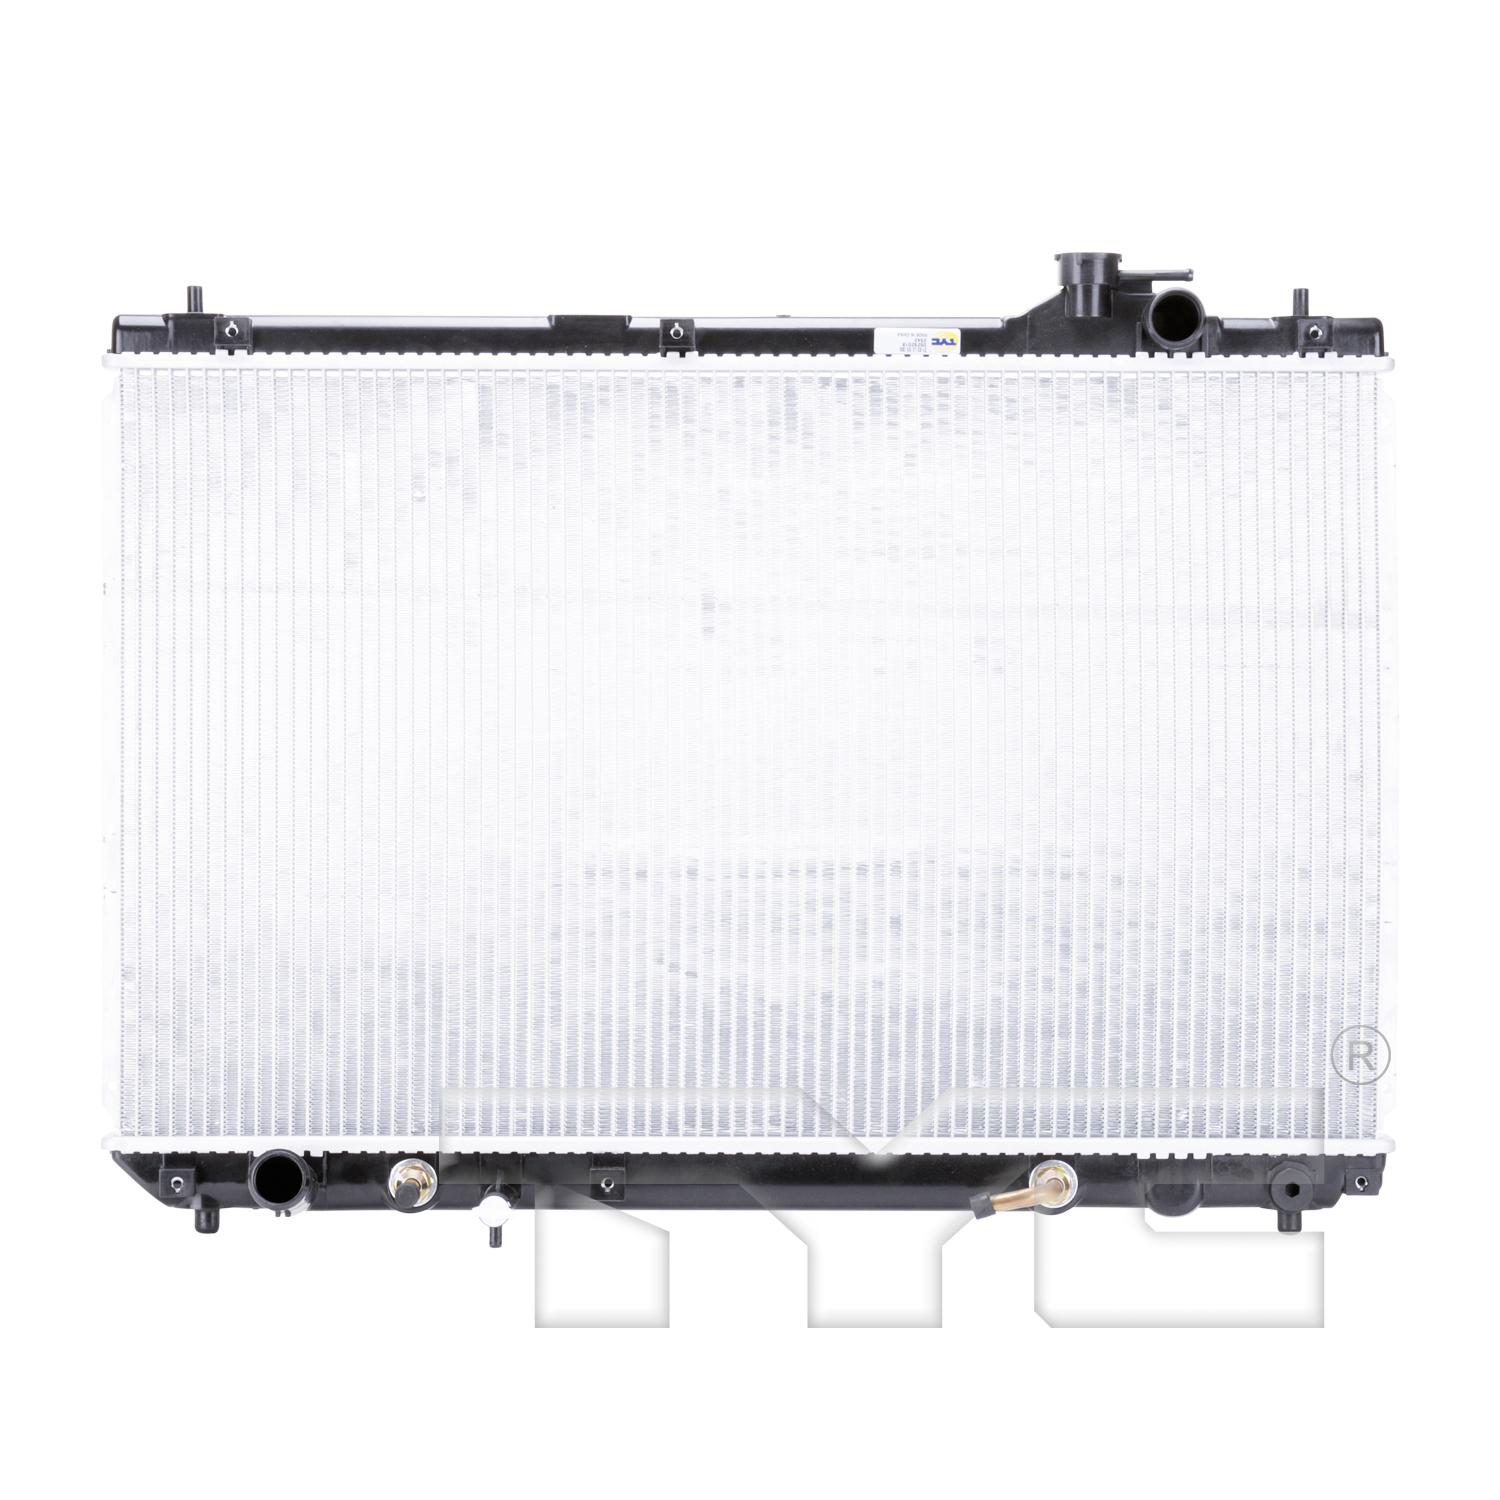 Aftermarket RADIATORS for LEXUS - RX300, RX300,01-03,Radiator assembly